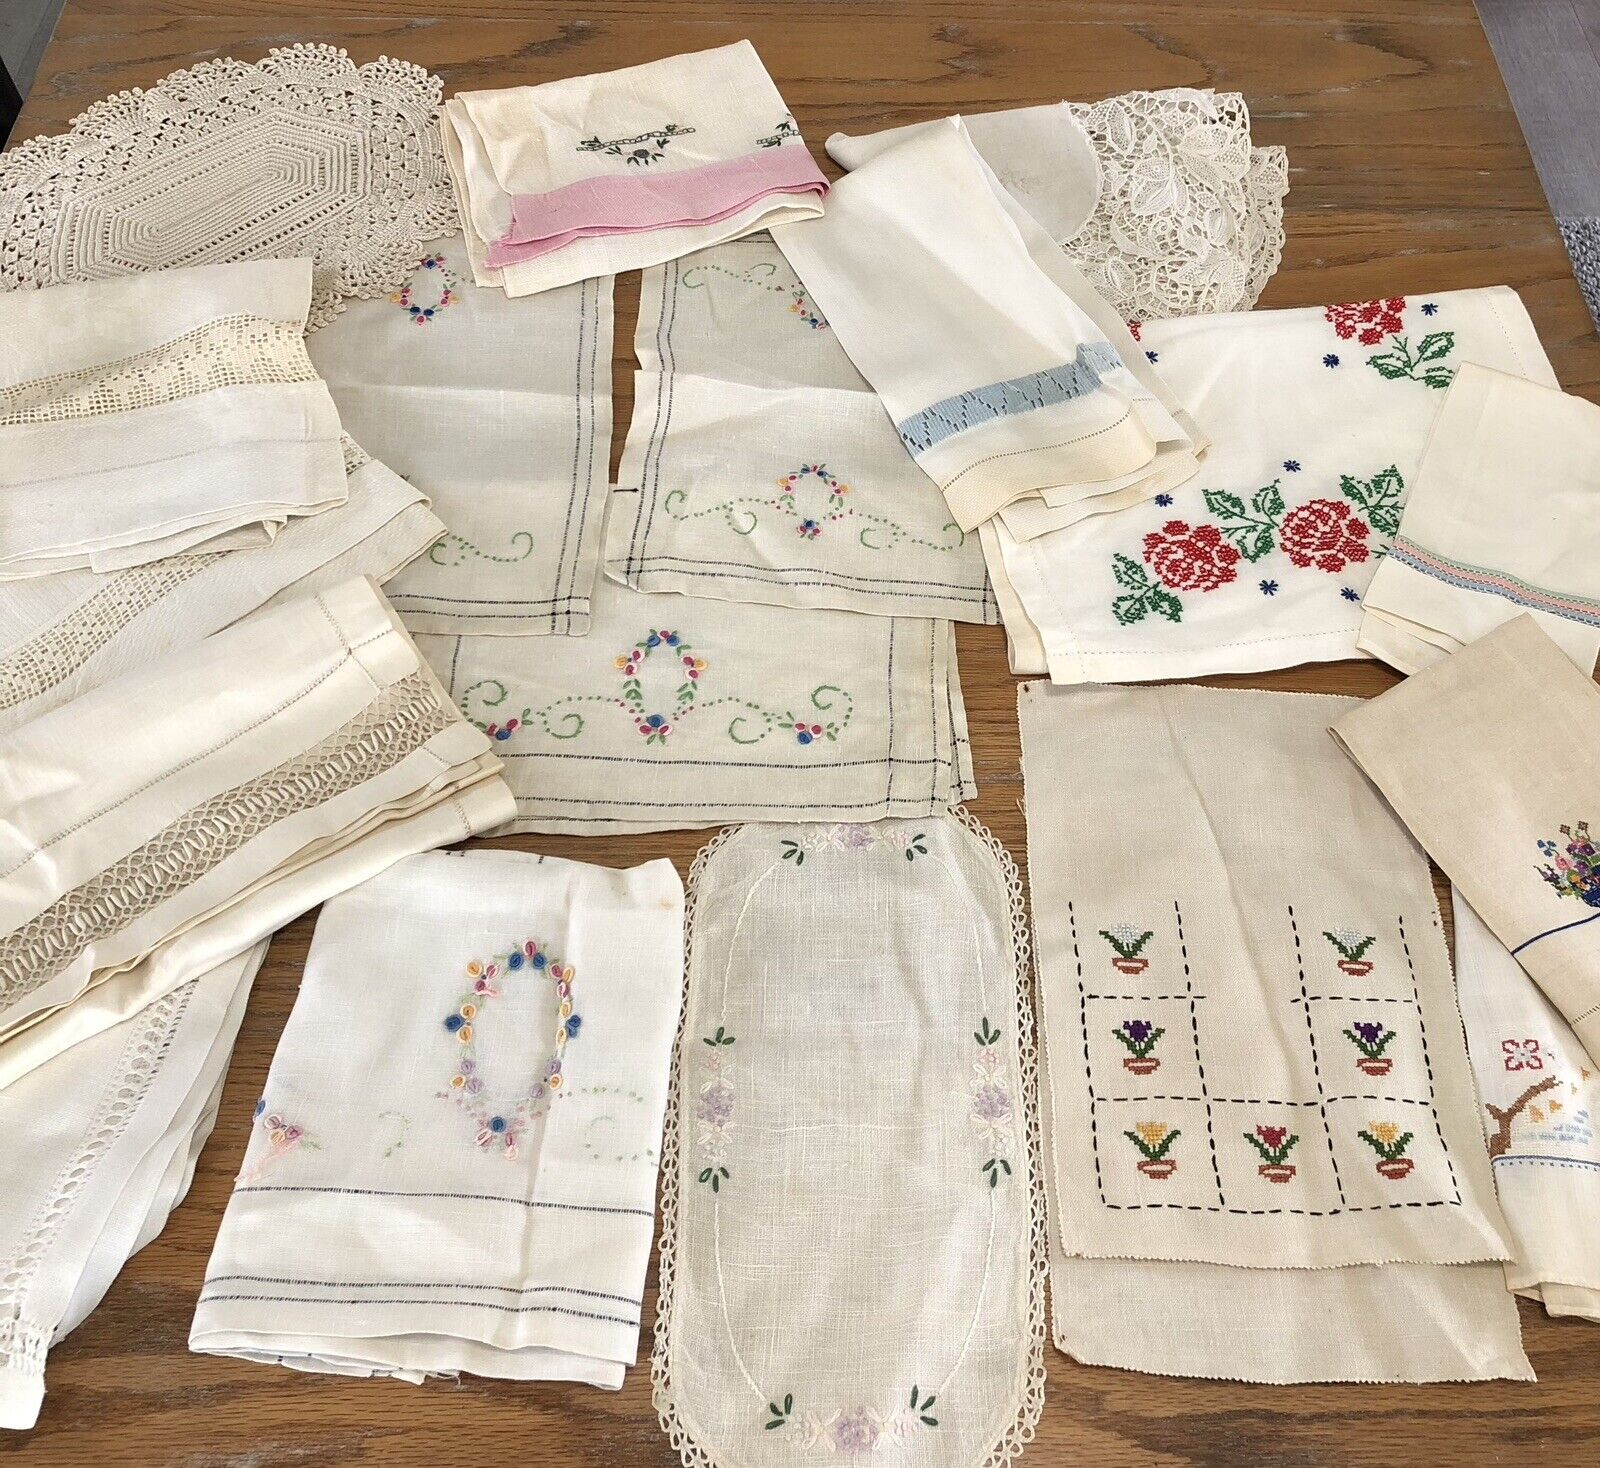 Large Lot of Vintage Linens, Tea Towels, Napkins, Table Runners